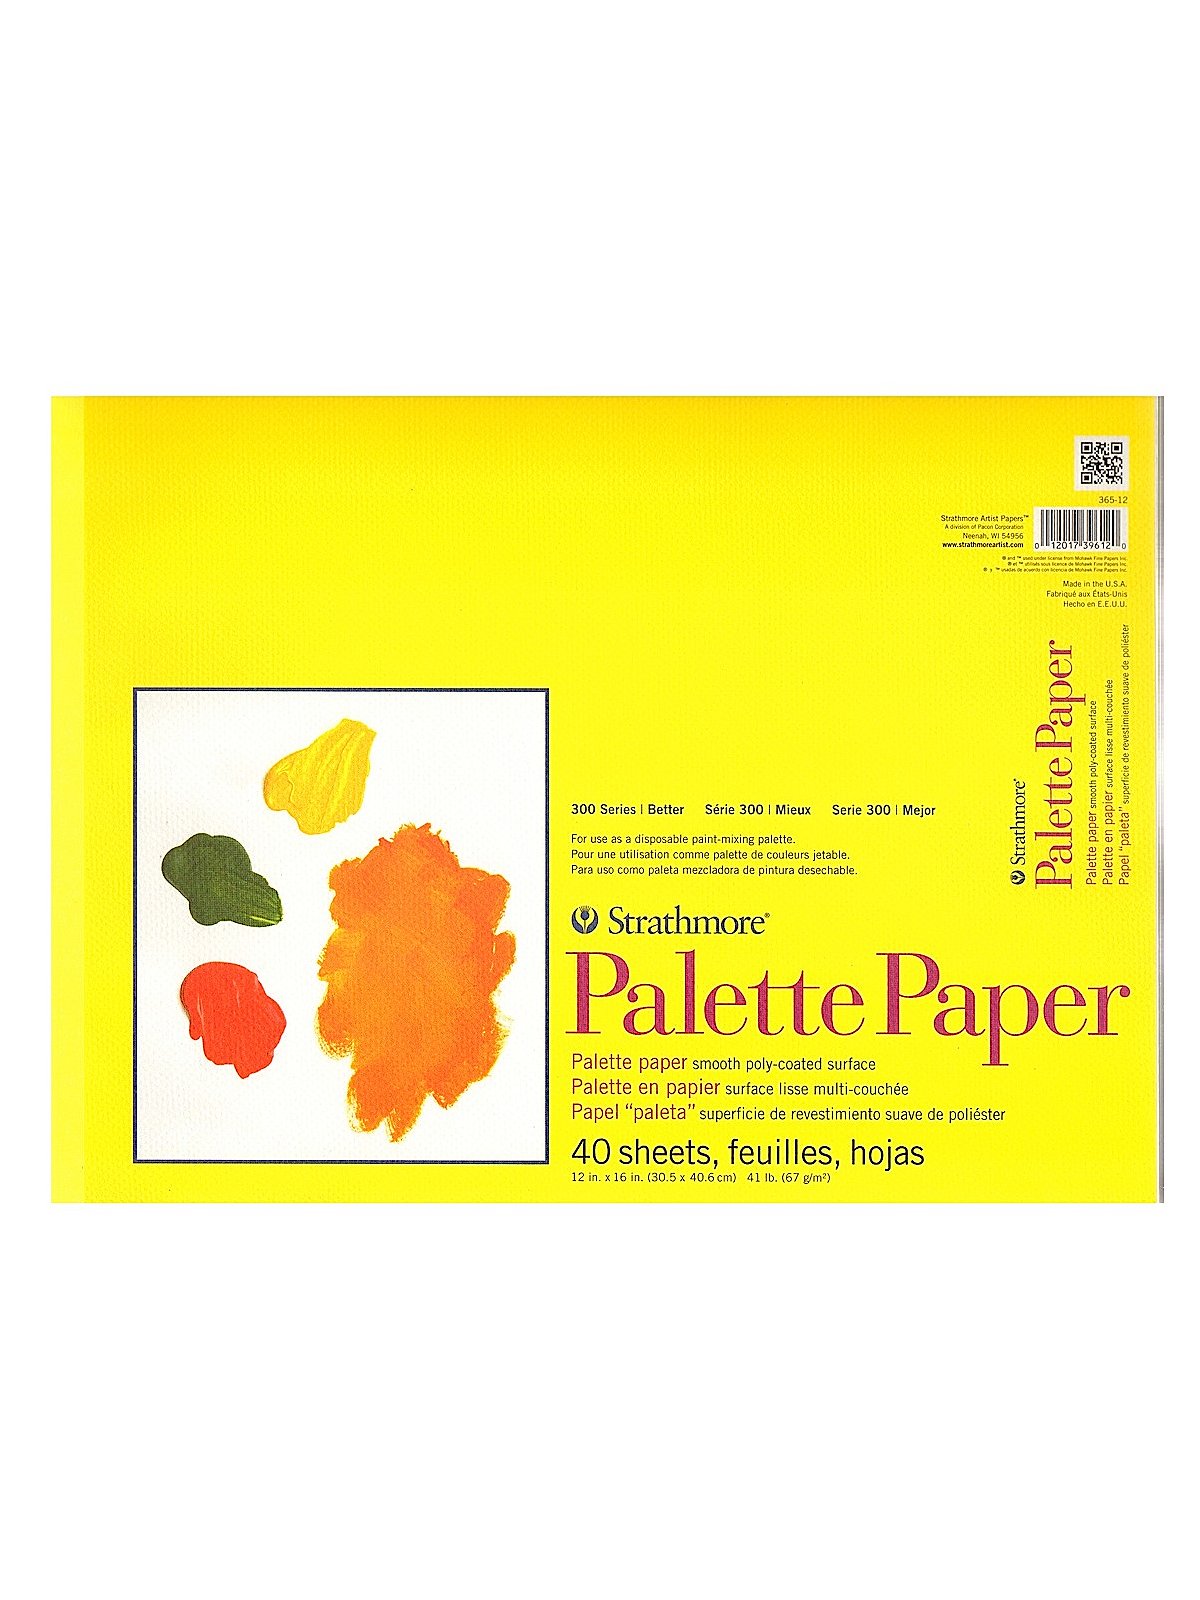 NEW! Oil Painting Paper - Strathmore Artist Papers